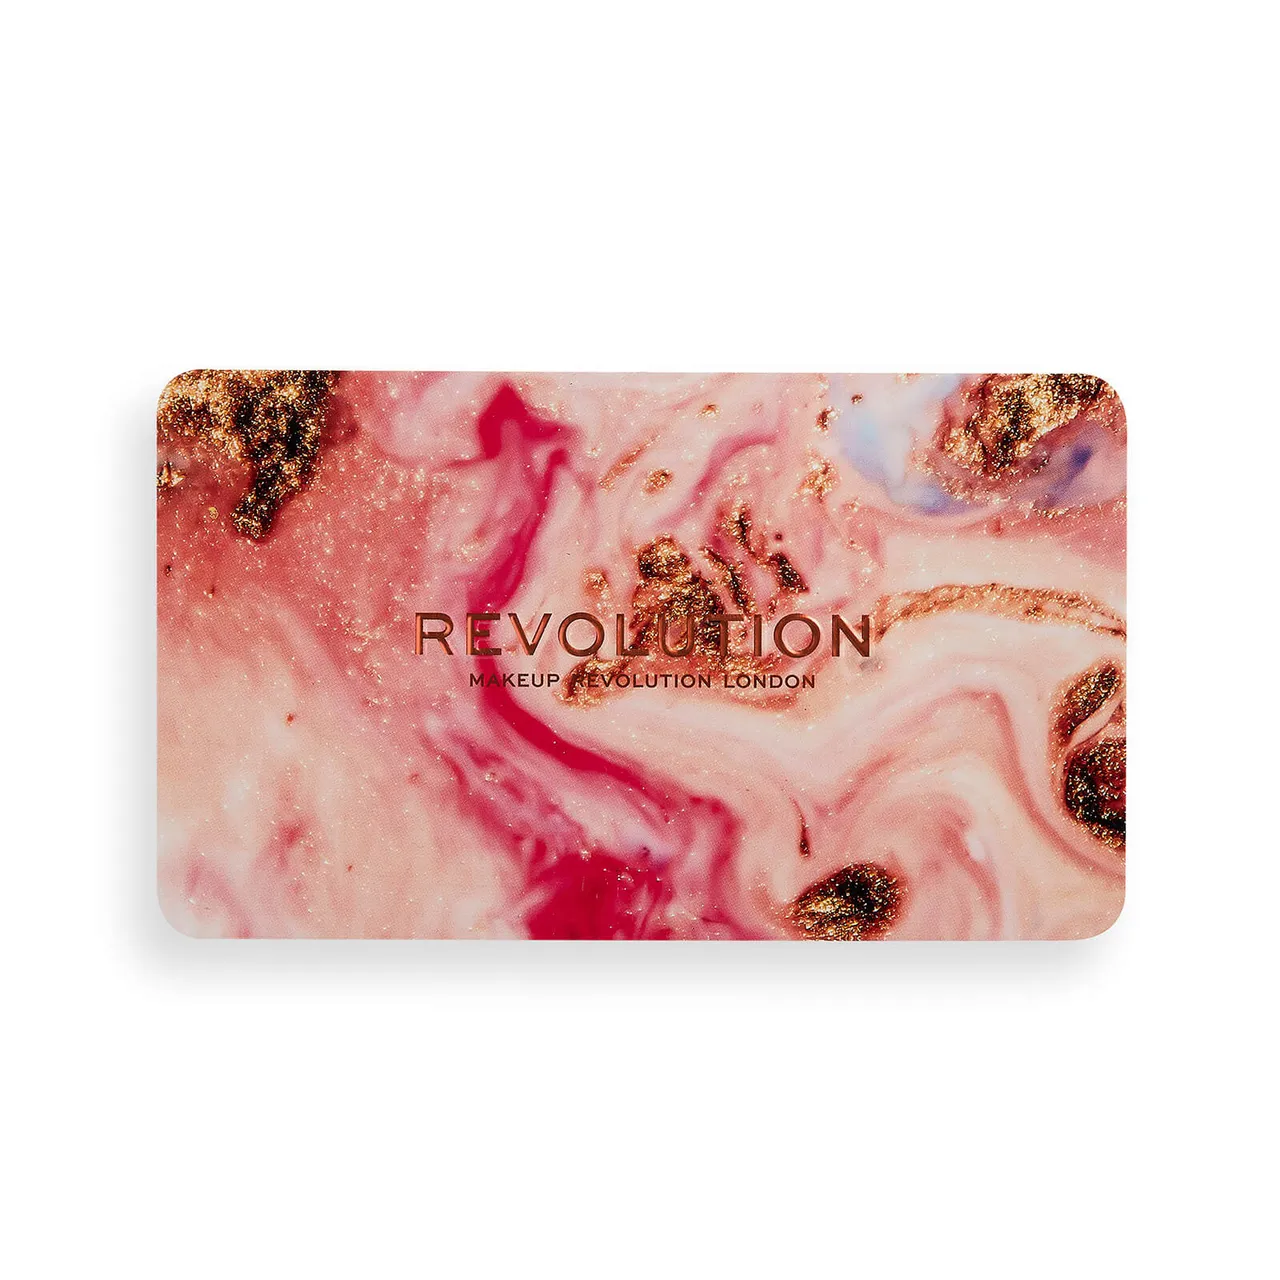 Makeup Revolution Flawless Baby Affinity Eye Shadow Palette